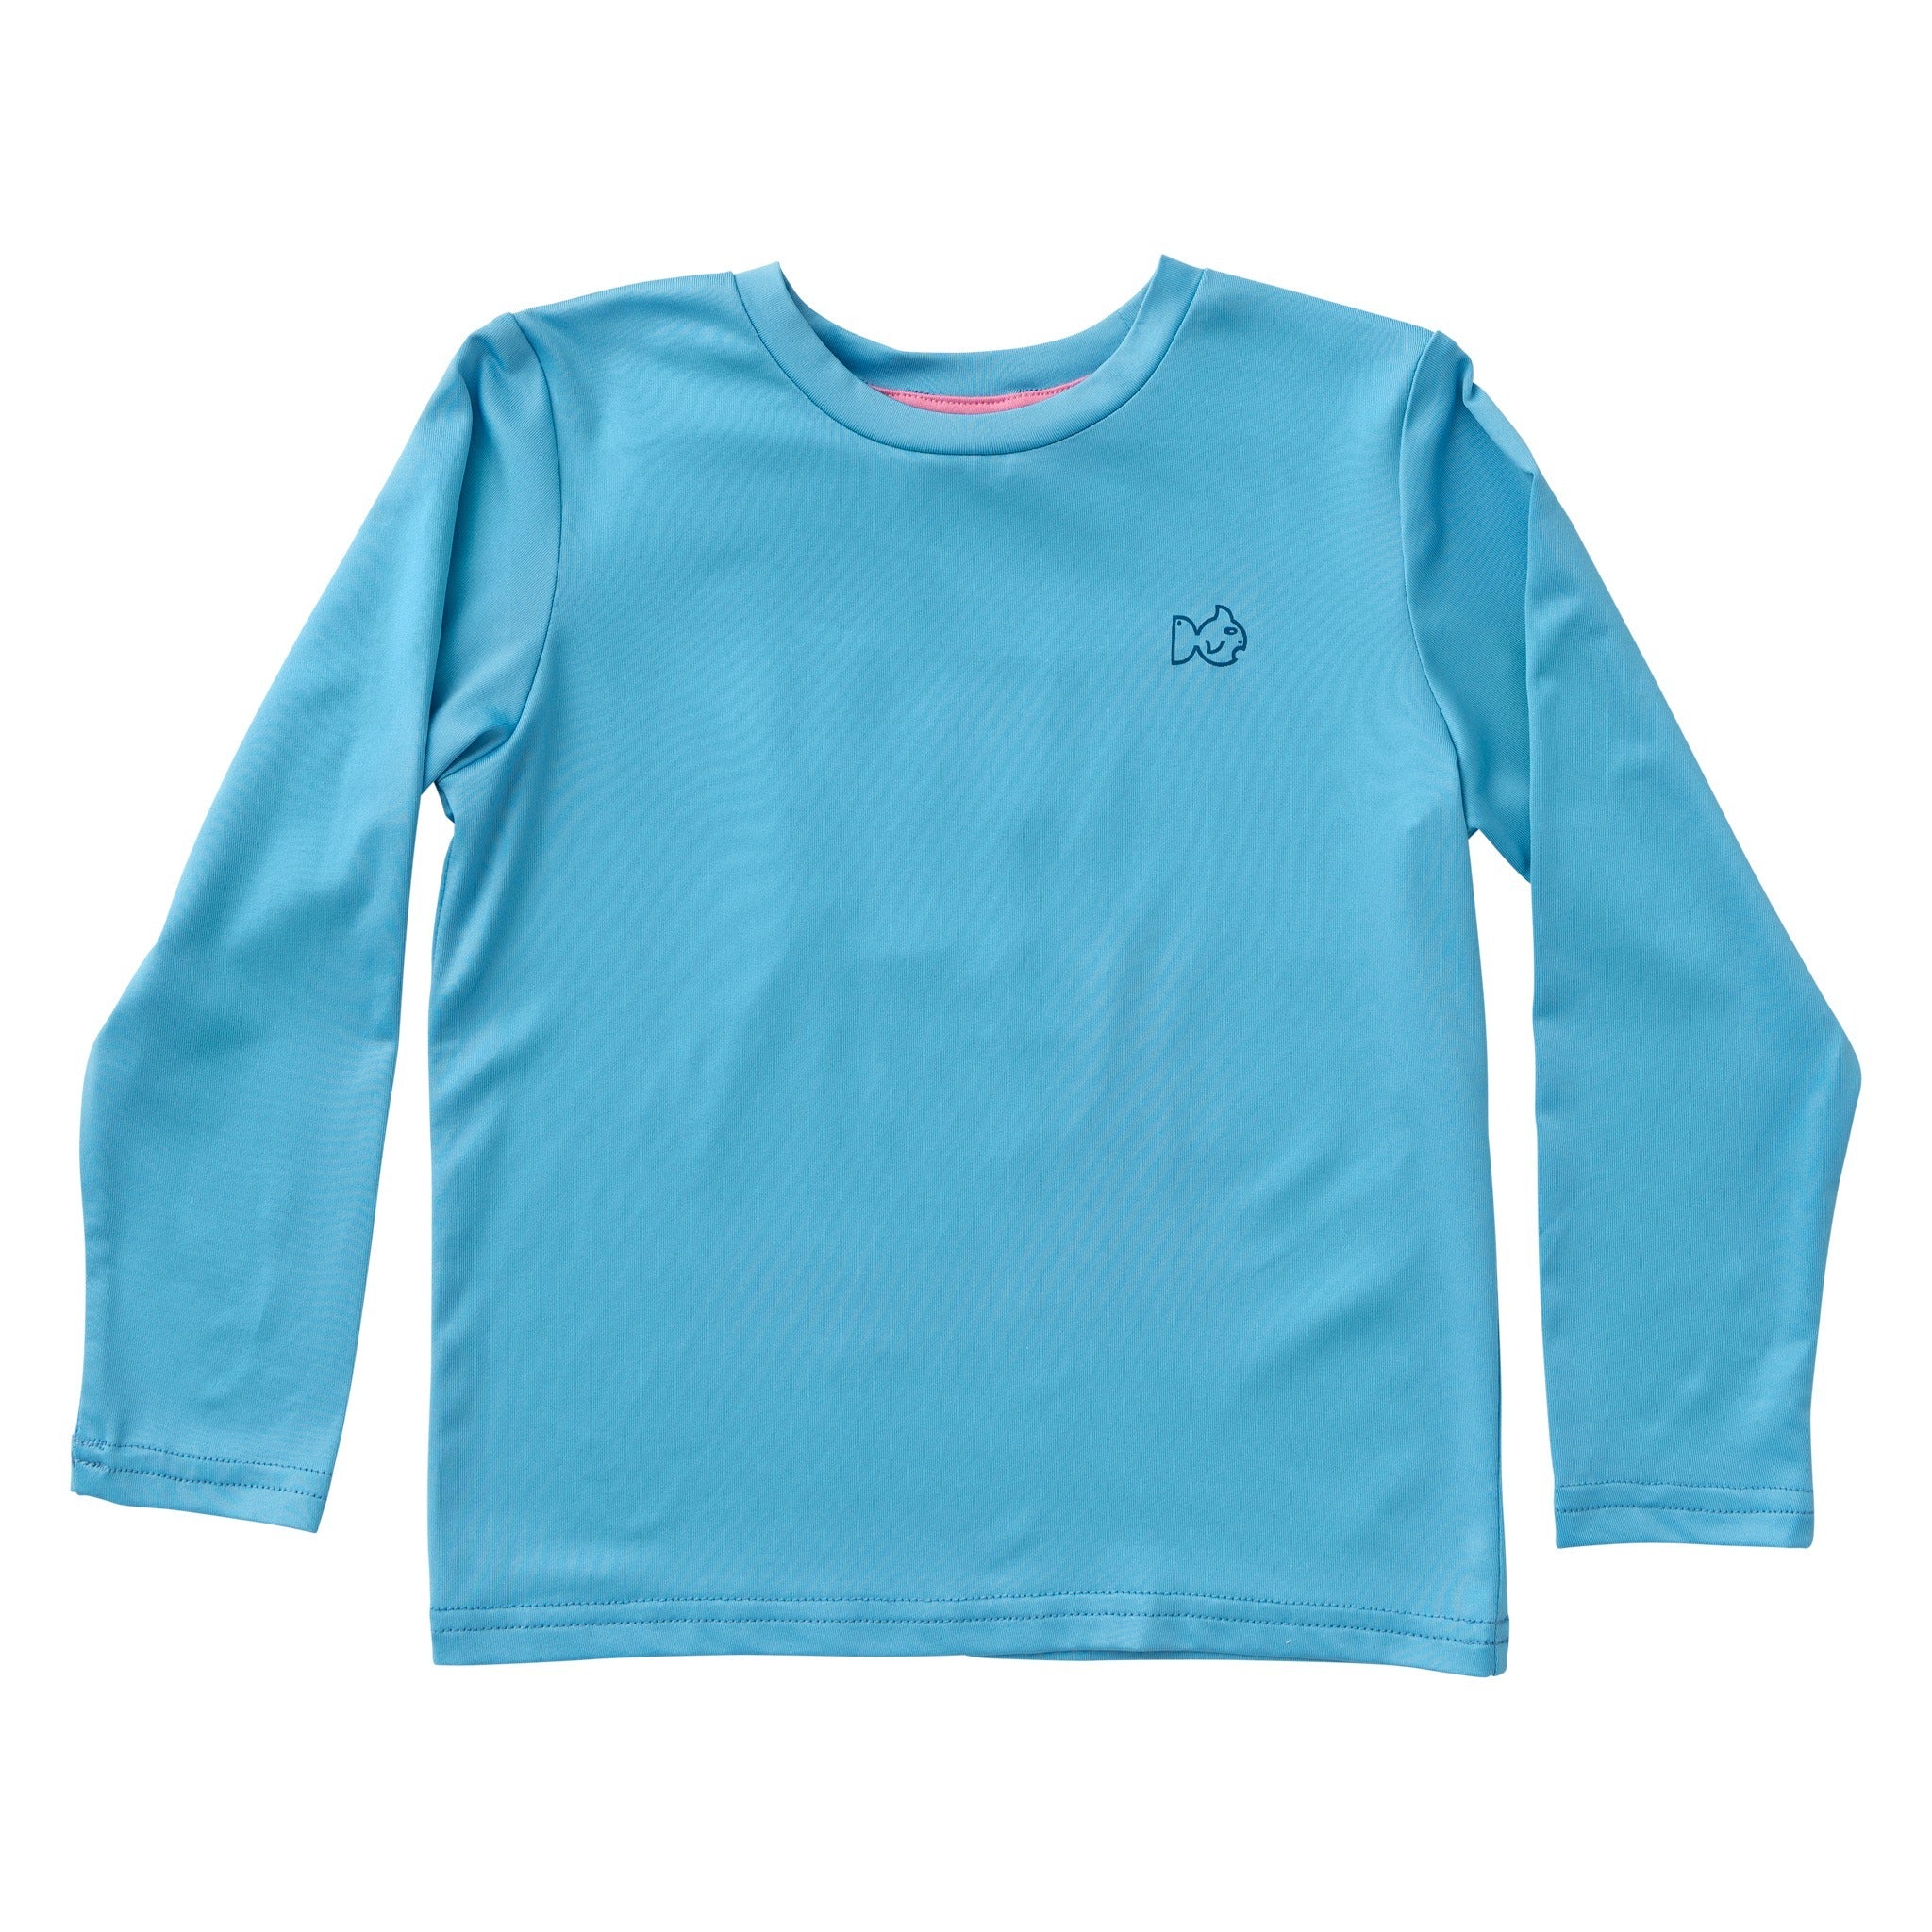 Pro Performance Tee - Ethereal Blue (Size 6)